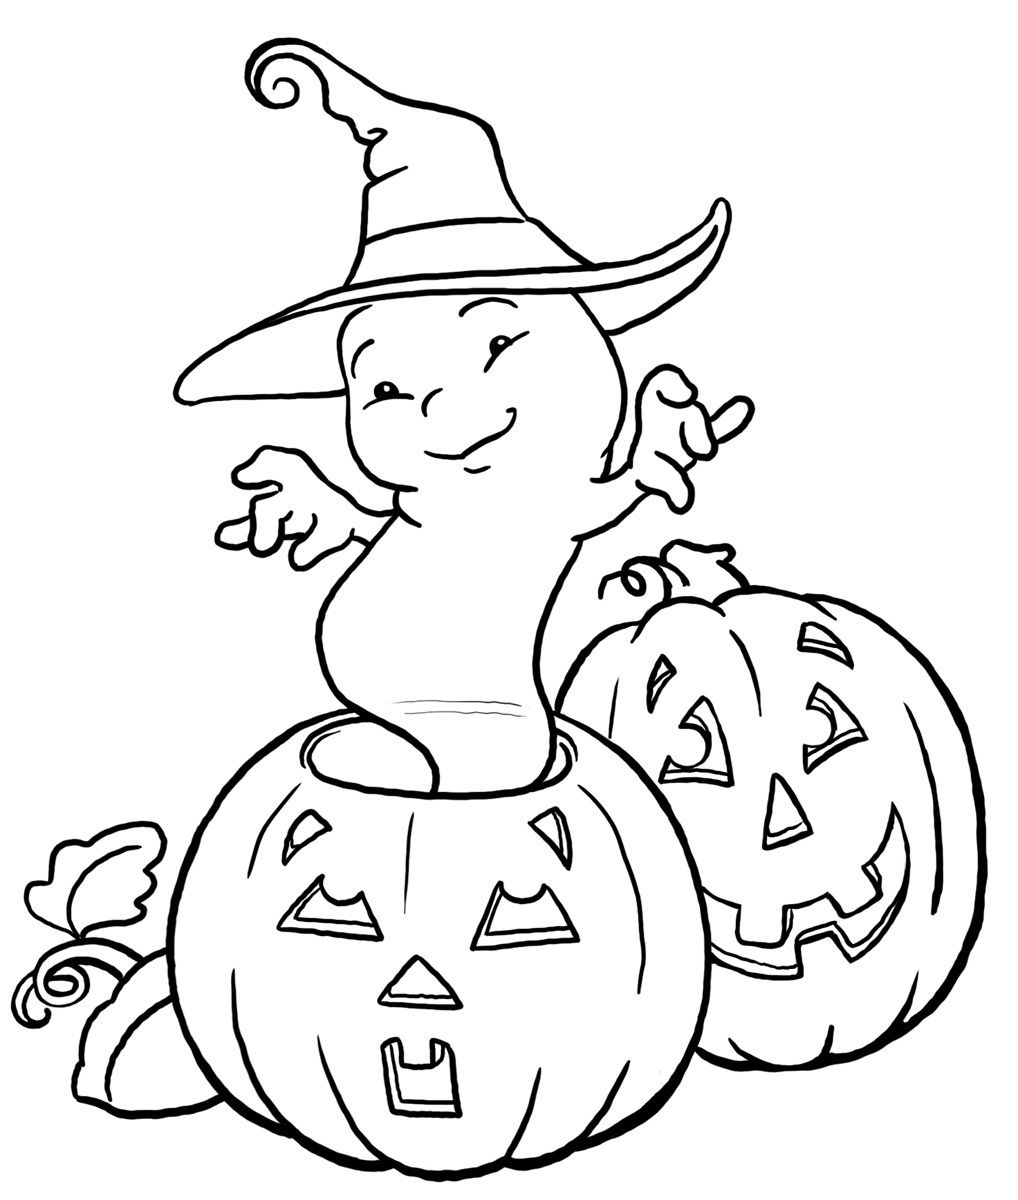 Free printable ghost coloring pages for kids pumpkin coloring pages halloween coloring book halloween coloring pages